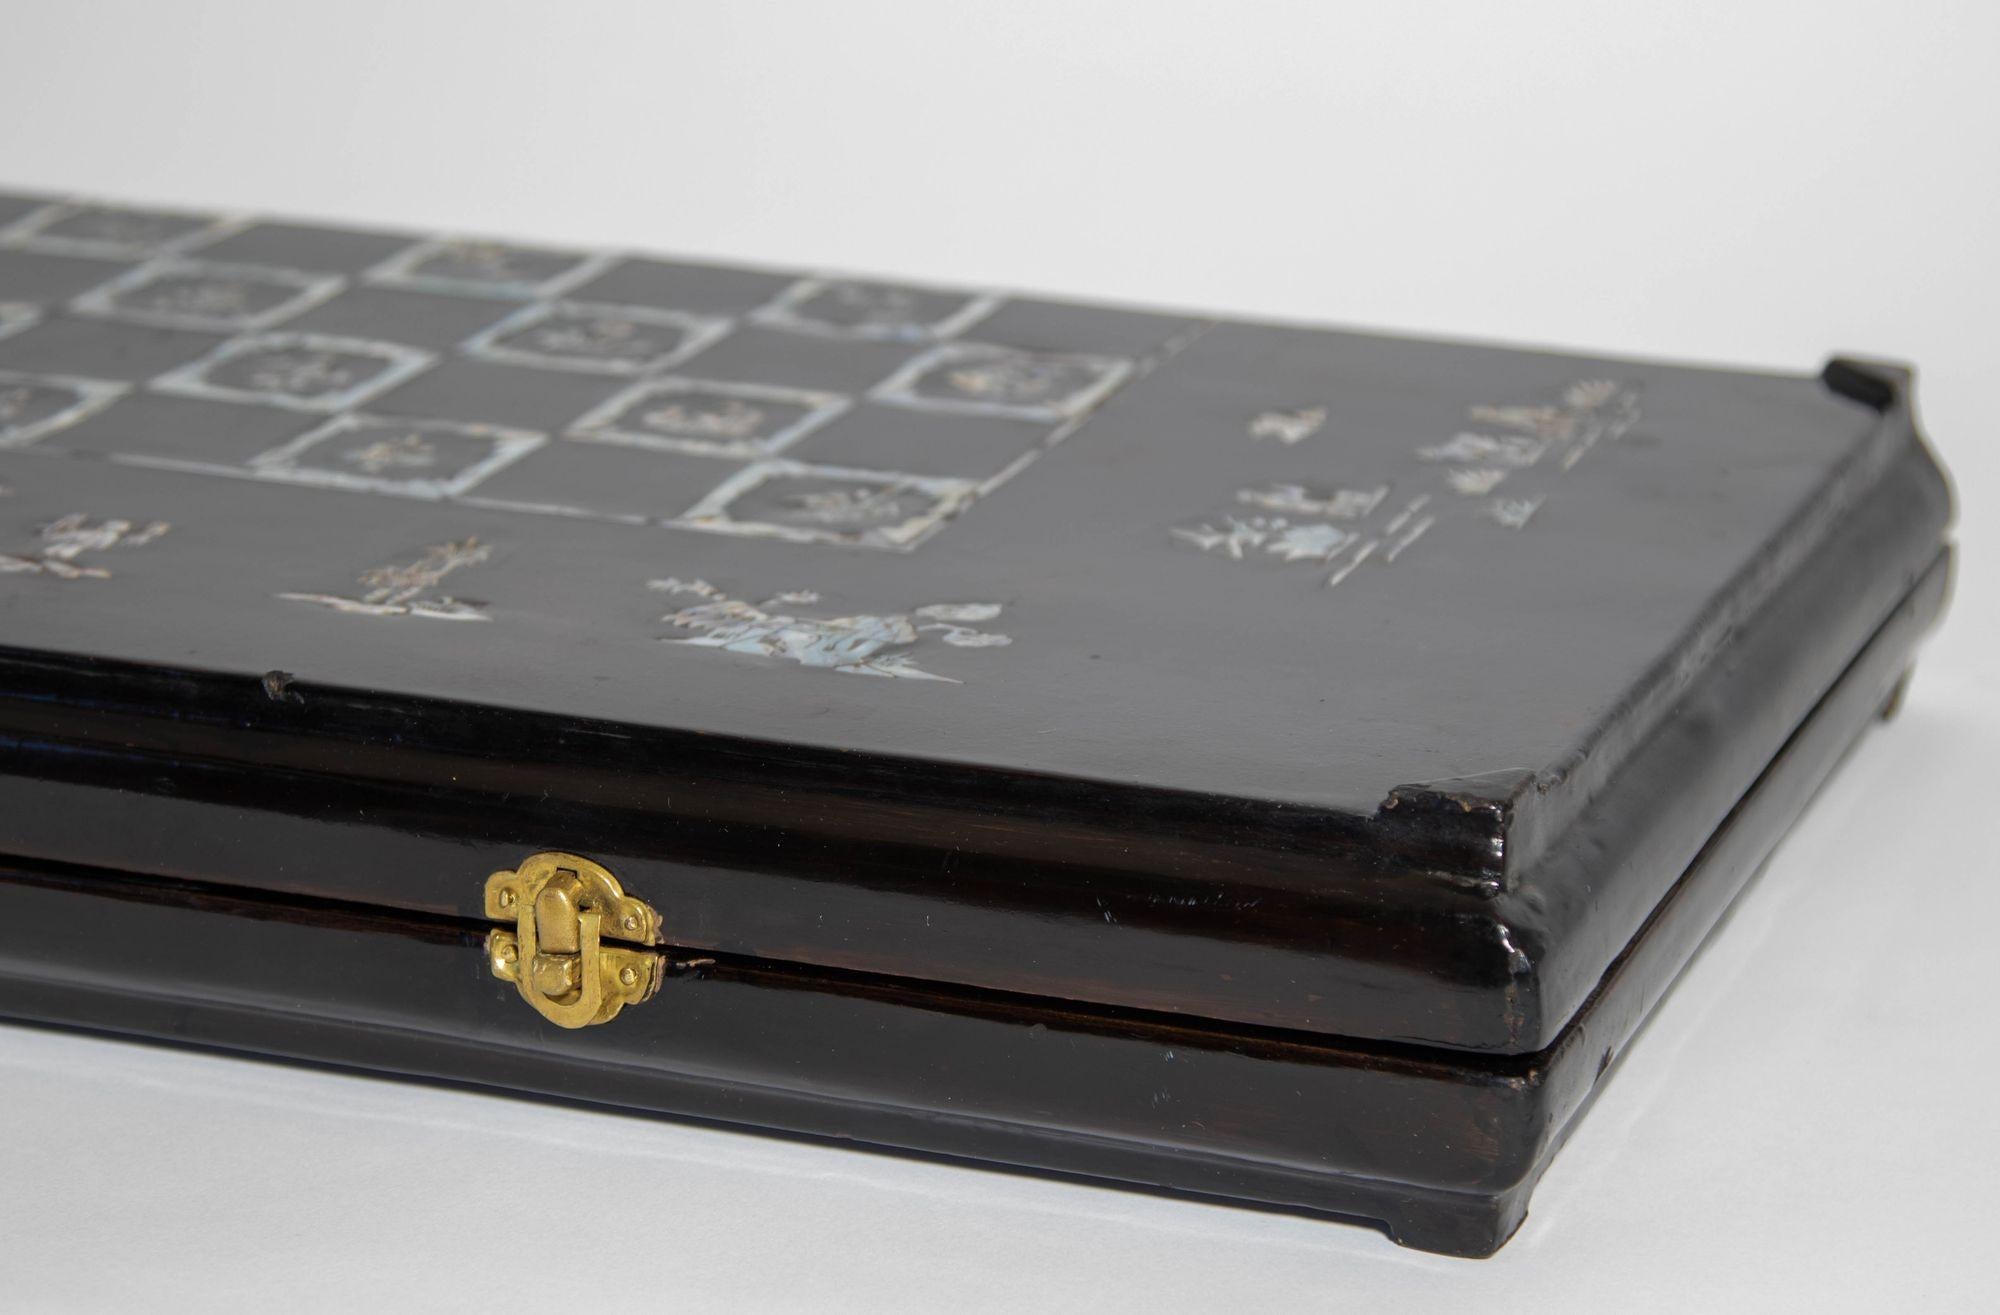 Antique Victorian Chinese export black lacquered wood and mother of pearl inlaid folding games box, backgammon, chess and checkers game.
The fine antique Chinese game board in black lacquered wood and mother-of-pearl inlays, decorated with